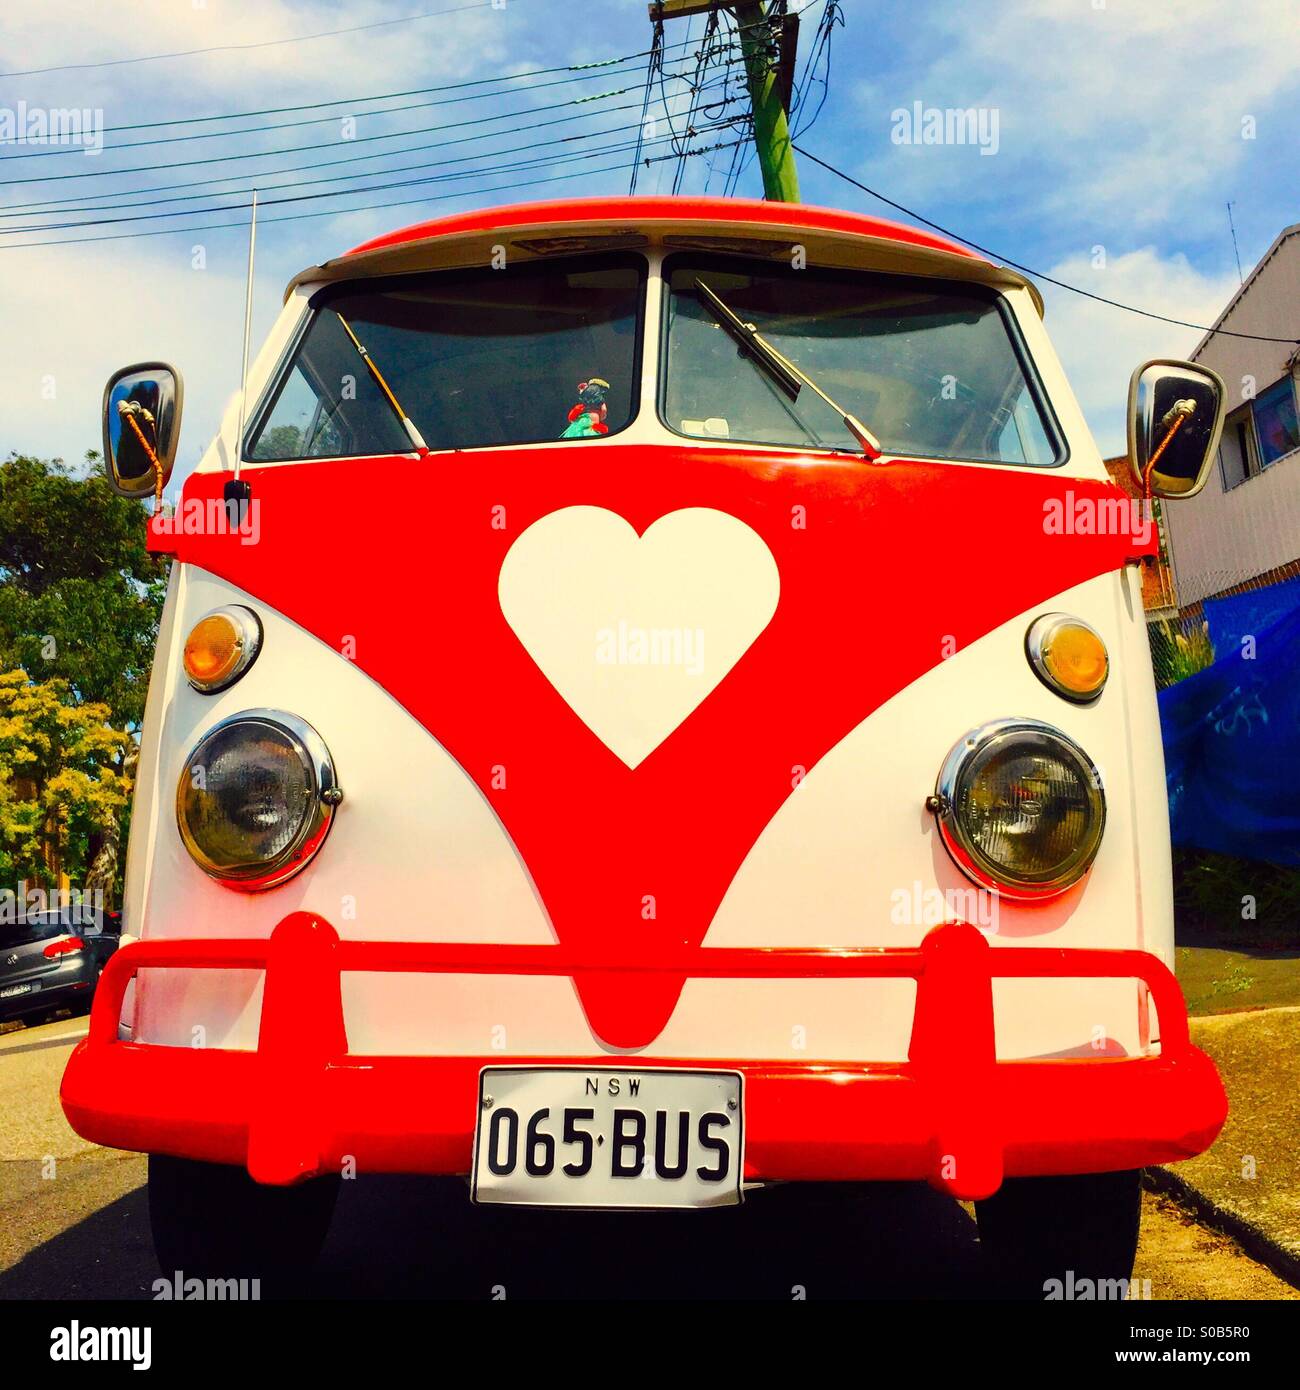 A vintage VW bus with a heart-shaped logo Stock Photo